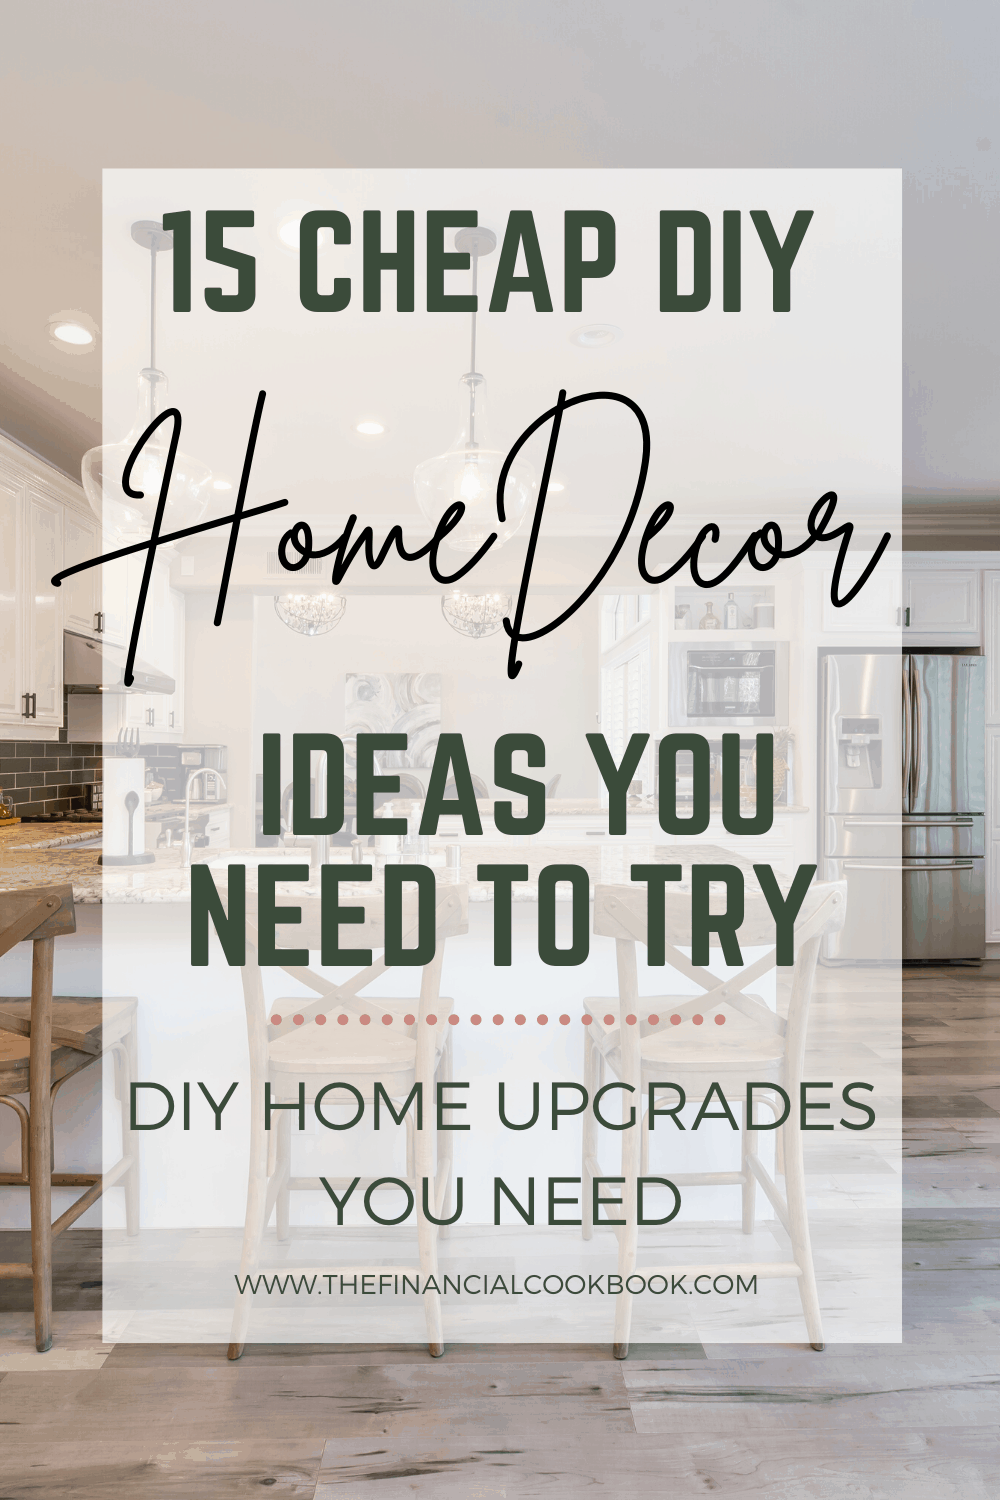 15 CHEAP DIY HOME DECOR IDEAS YOU NEED TO TRY